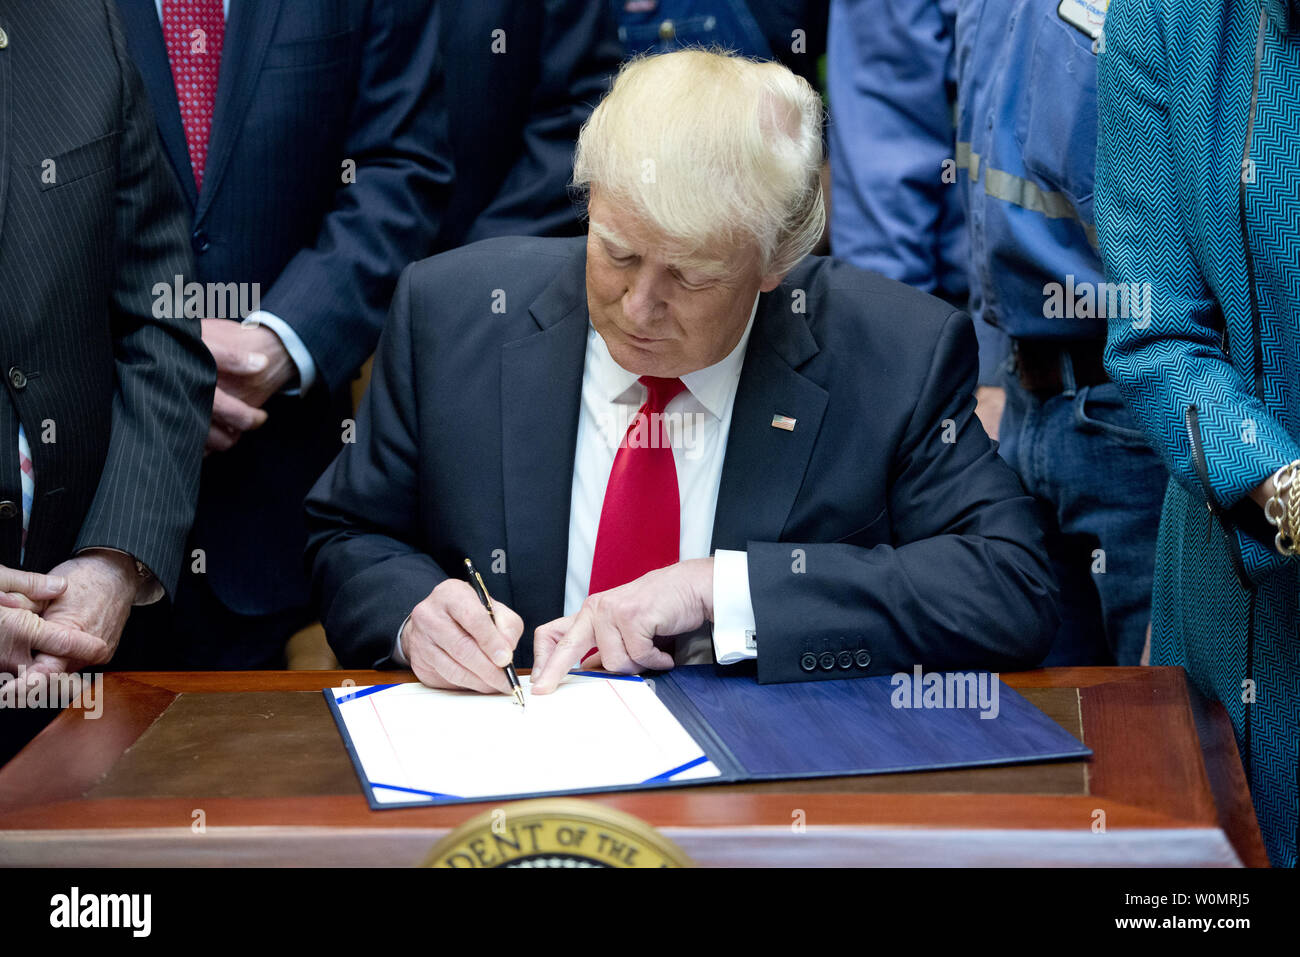 United States President Donald J. Trump signs H.J. Res. 38, disapproving the rule submitted by the US Department of the Interior known as the Stream Protection Rule in the Roosevelt Room of the White House in Washington, DC on February 16, 2017.  The Department of Interior's Stream Protection Rule, which was signed during the final month of the Obama administration, 'addresses the impacts of surface coal mining operations on surface water, groundwater, and the productivity of mining operation sites,' according to the Congress.gov summary of the resolution..Credit: Ron Sachs / Pool via CNP Stock Photo